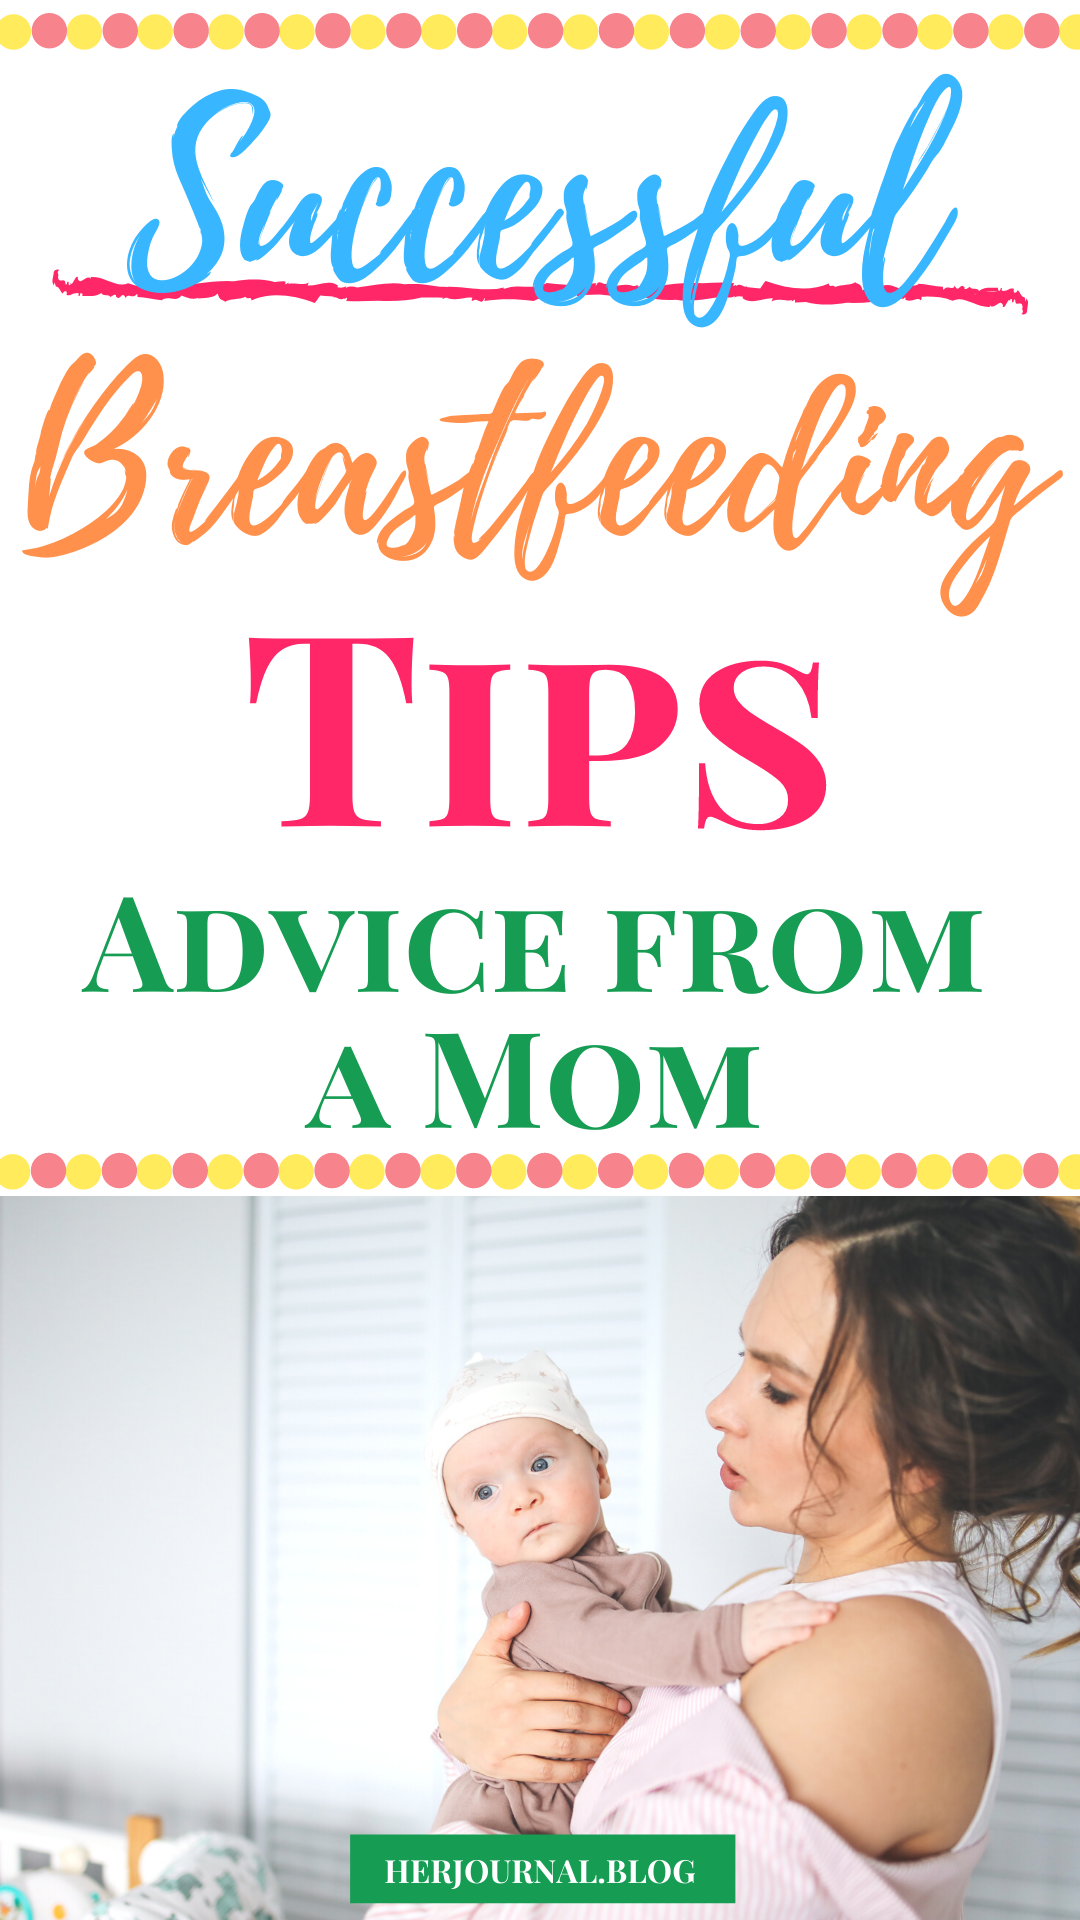 Successful Breastfeeding Tips: Advice for First Time Moms